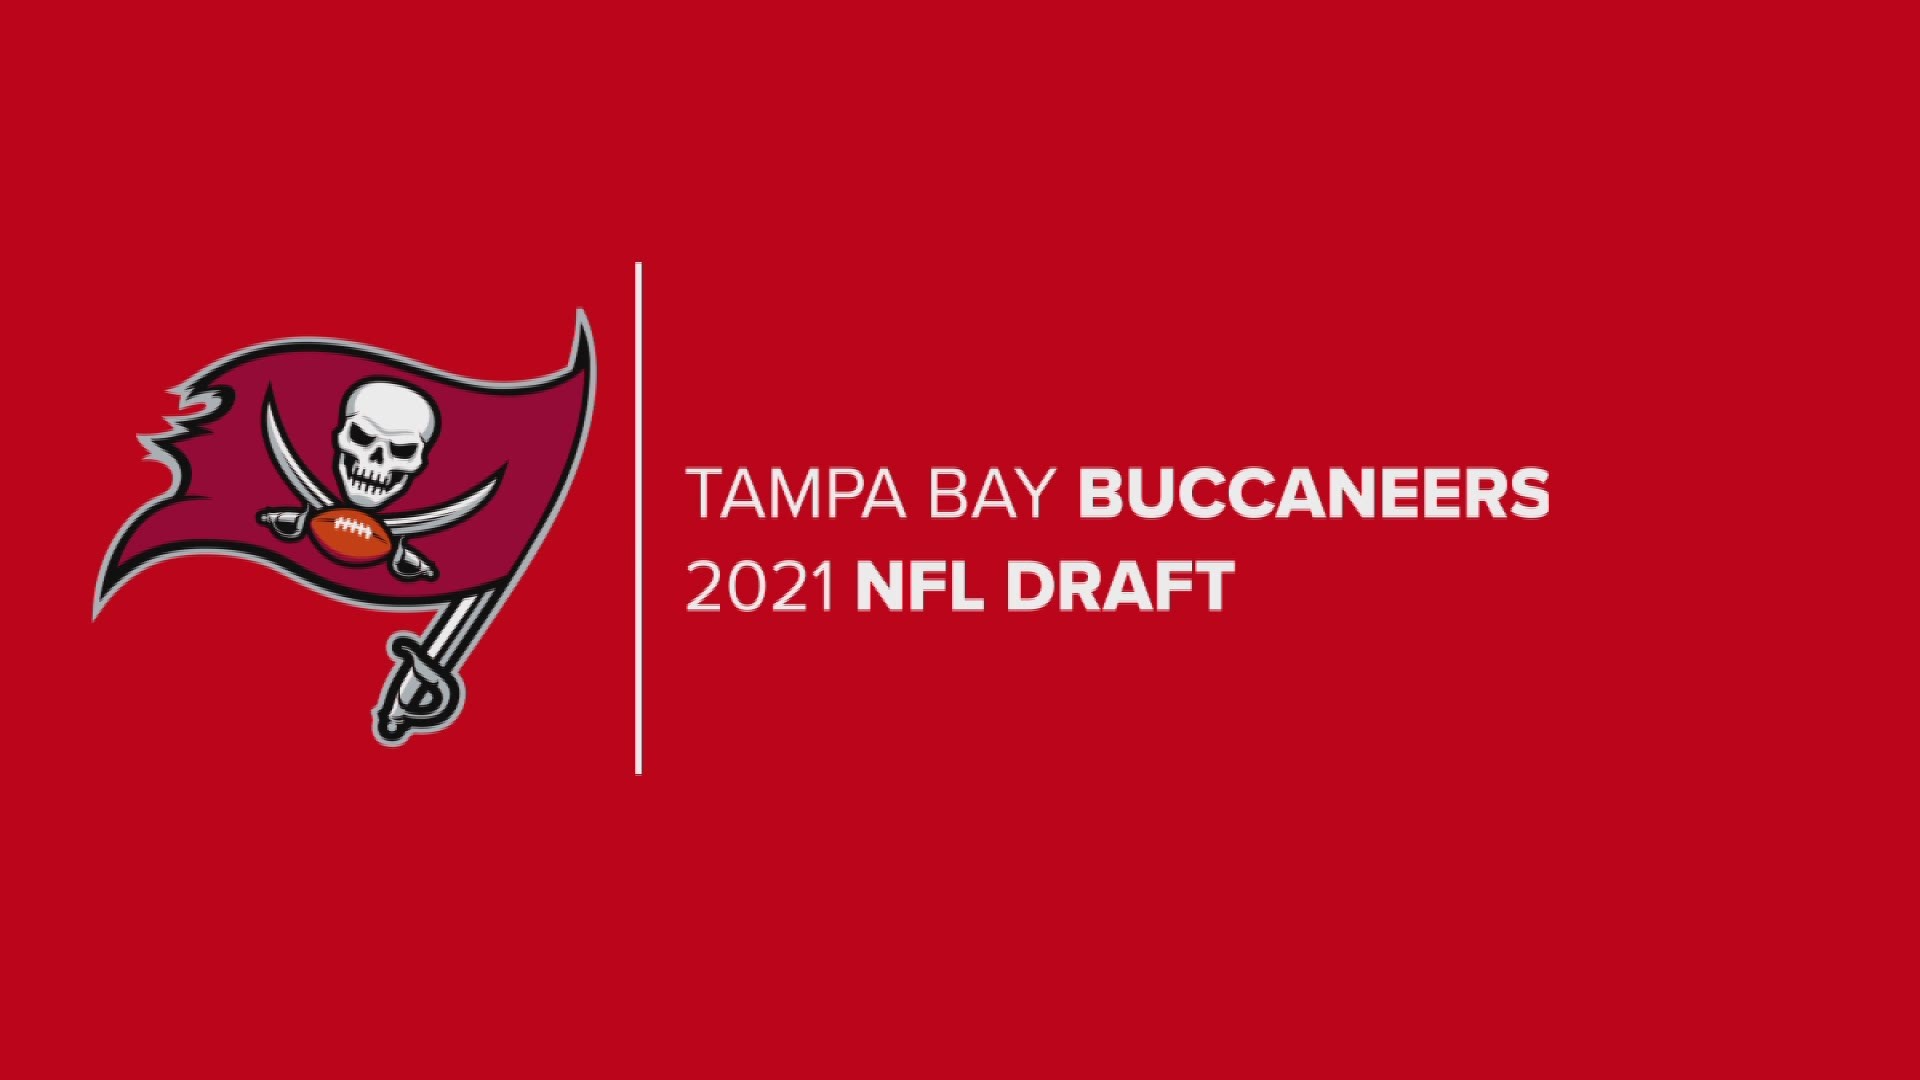 The newest additions to the Tampa Bay Buccaneers are quarterback Kyle Trask, of Florida, and offensive lineman Robert Hainsey, of Notre Dame.